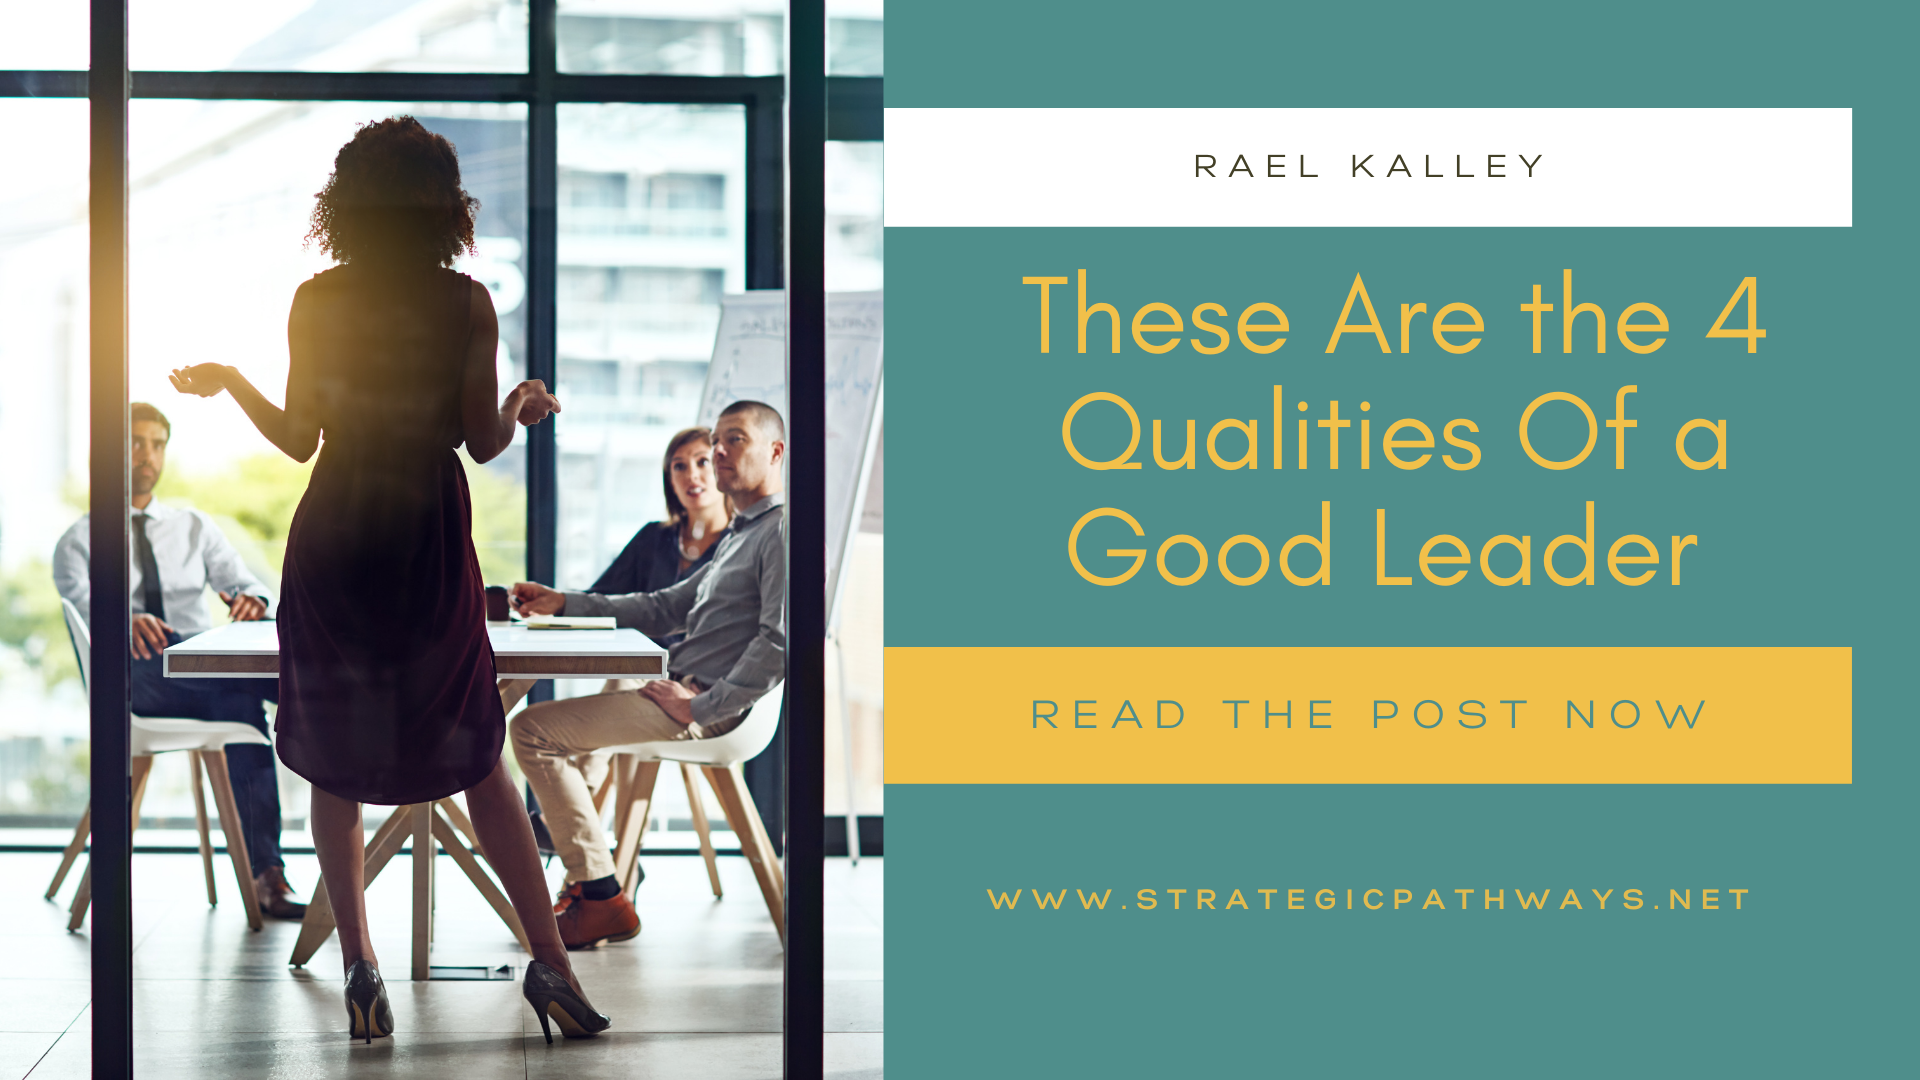 Text says "These Are the 4 Qualities Of a Good Leader" and image features a woman standing doing a presentation on a work meeting